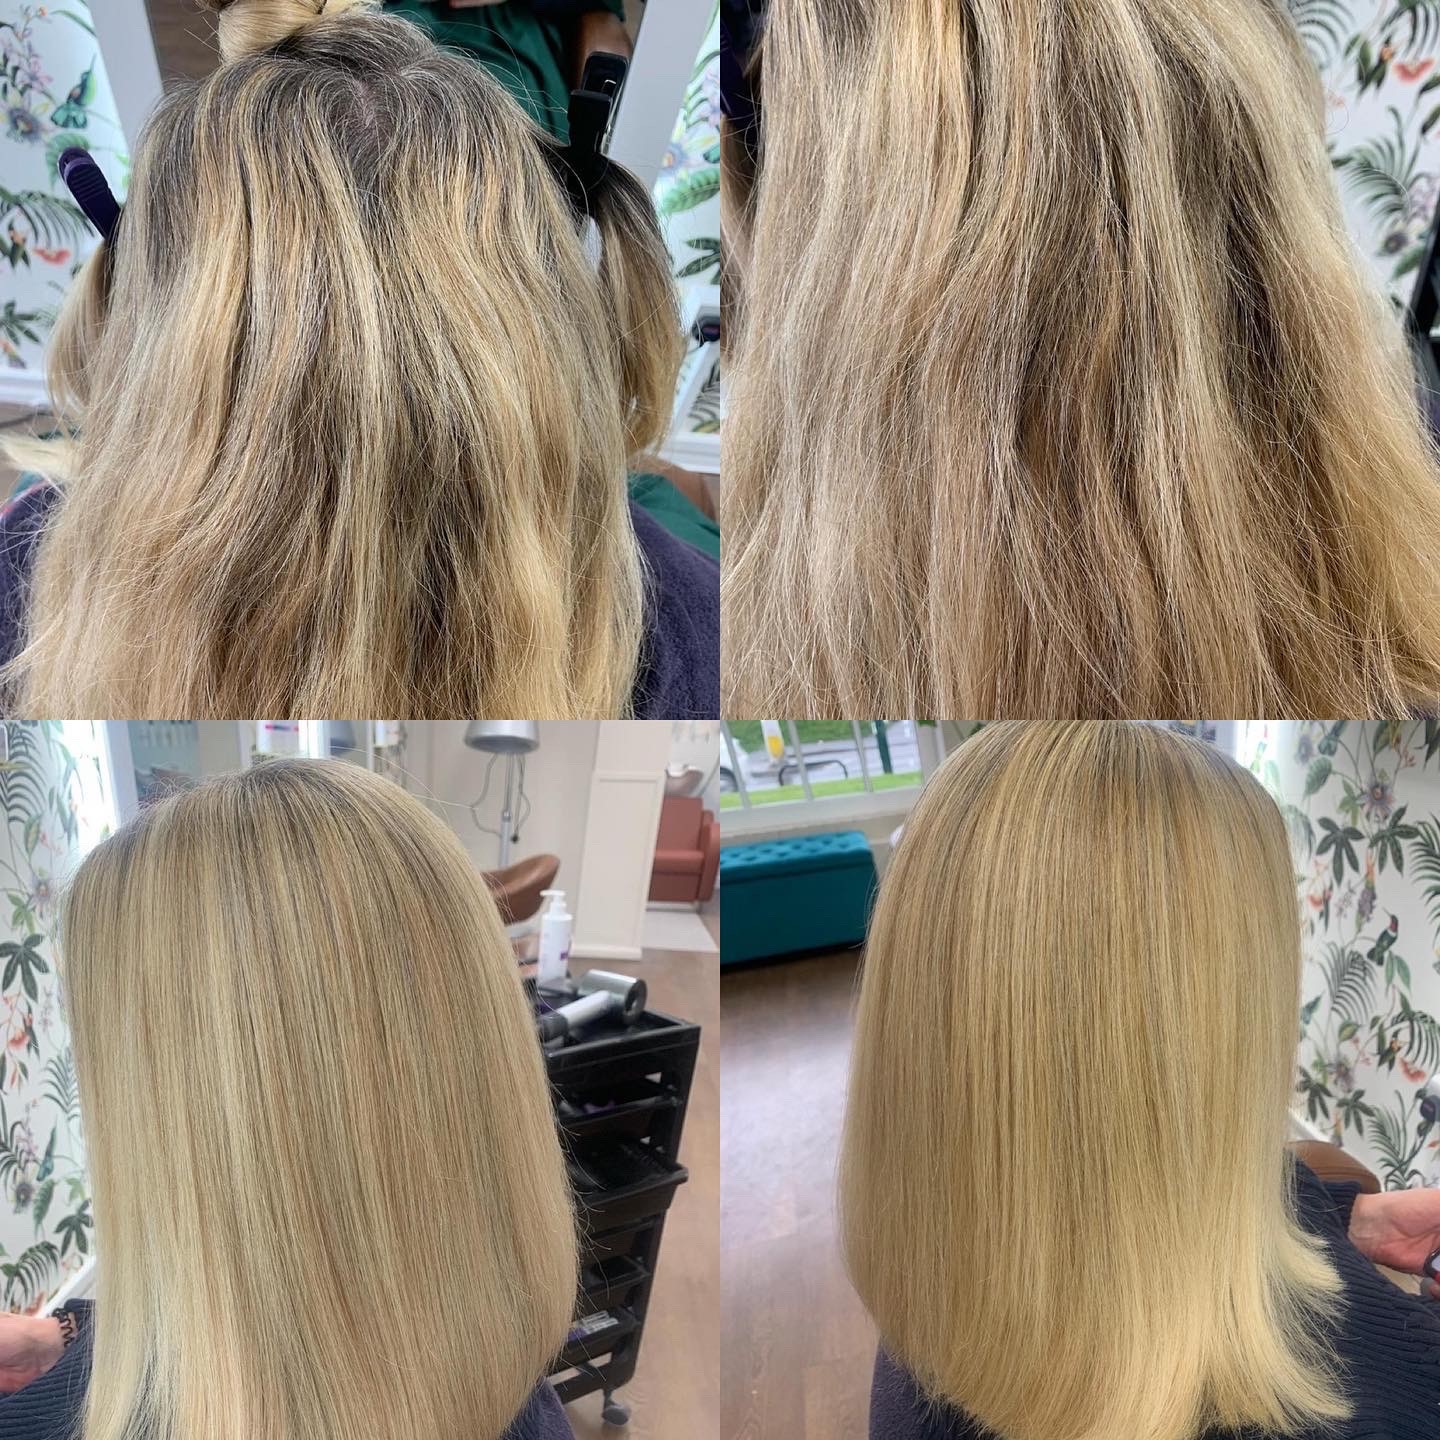 Full head highlights and smooth blow dry